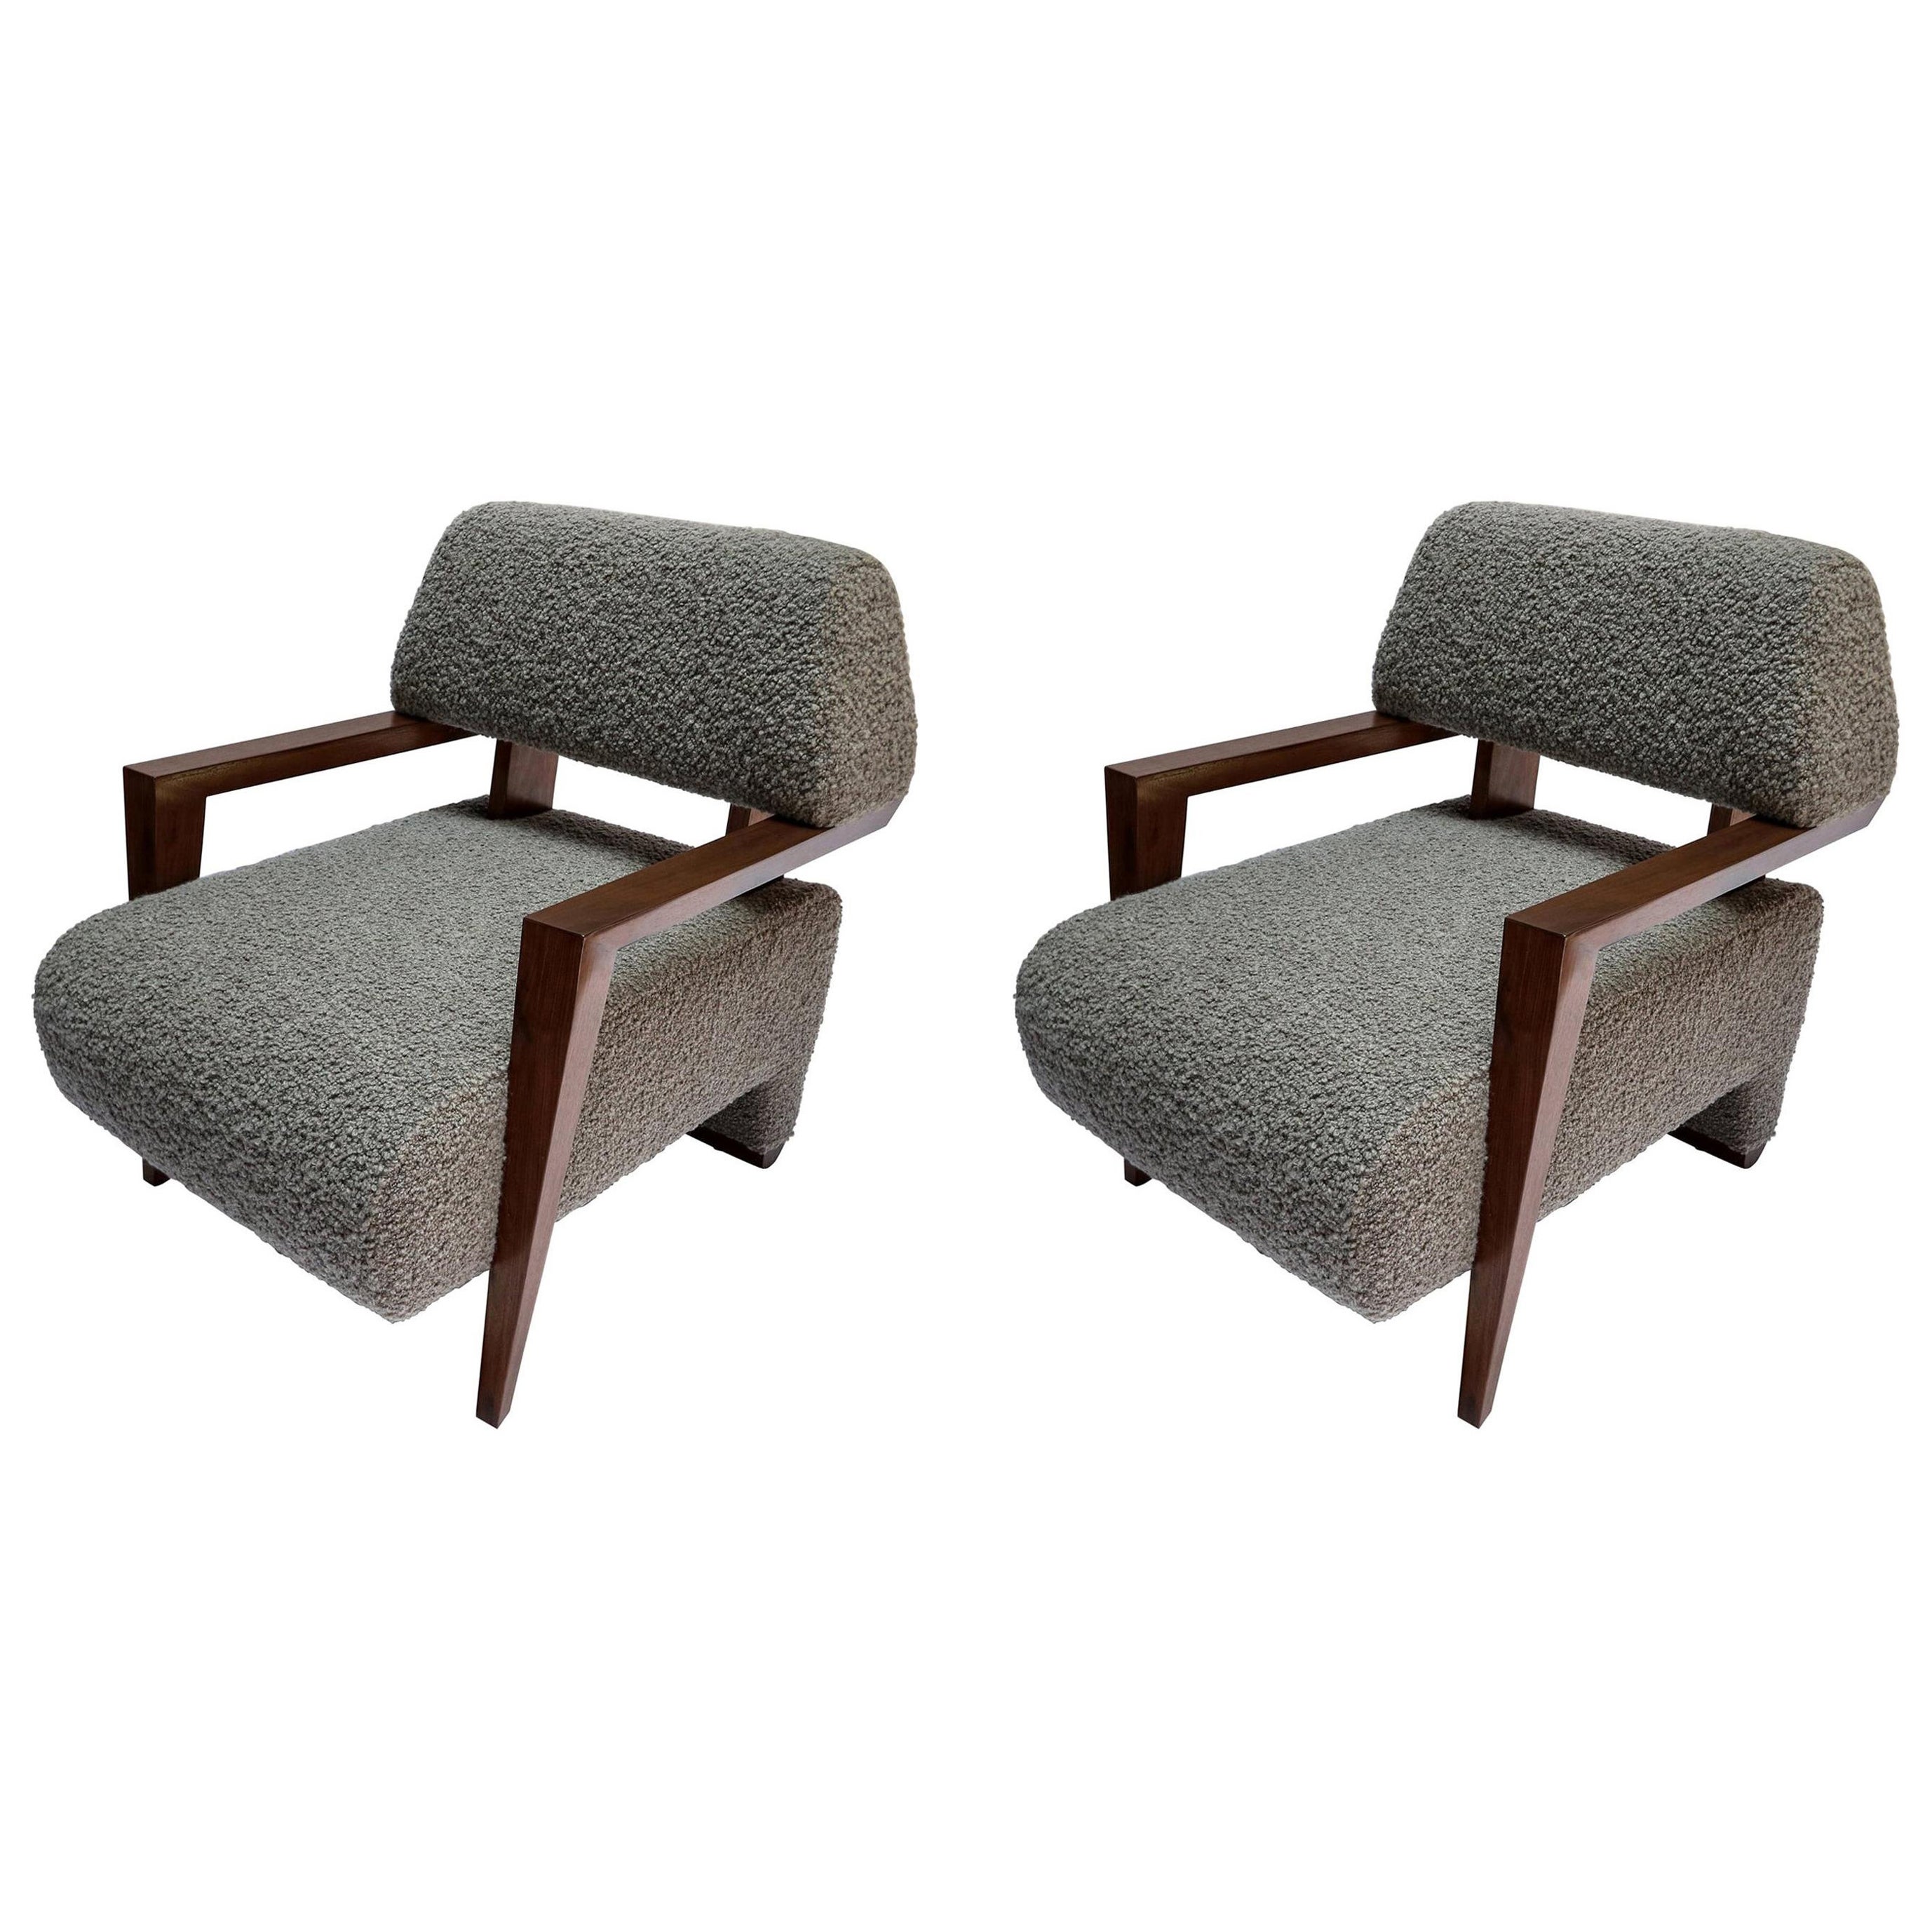 Pair of Custom Art Deco Mid-Century Style Walnut Armchairs by Adesso Imports